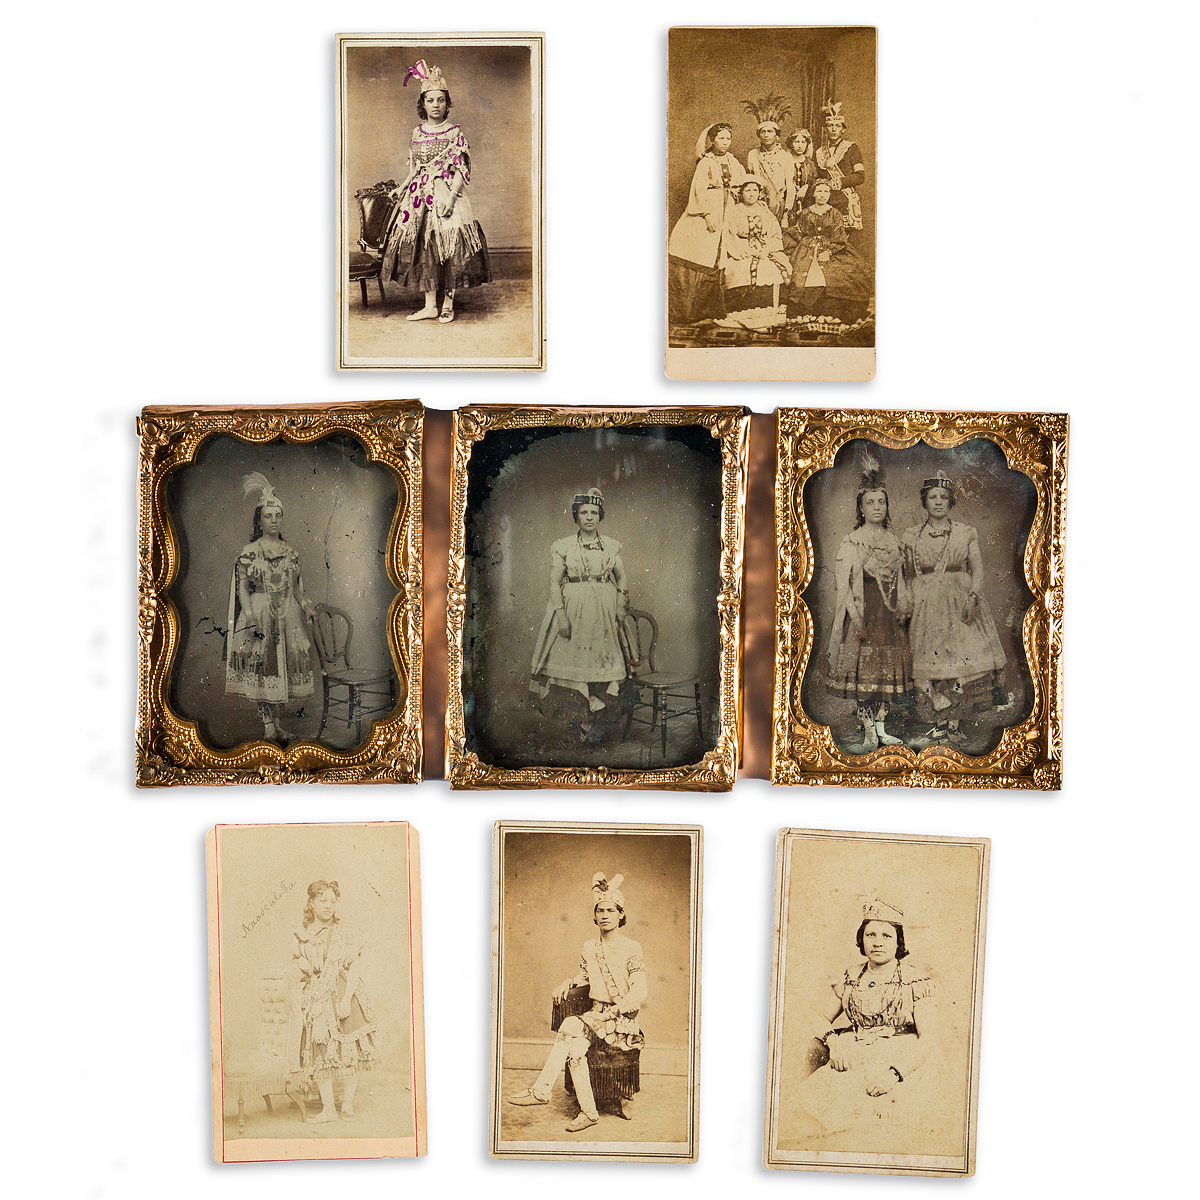 (AMERICAN INDIANS--PHOTOGRAPHS.) Group of 8 photographs of a performing troupe in New York and Canada.